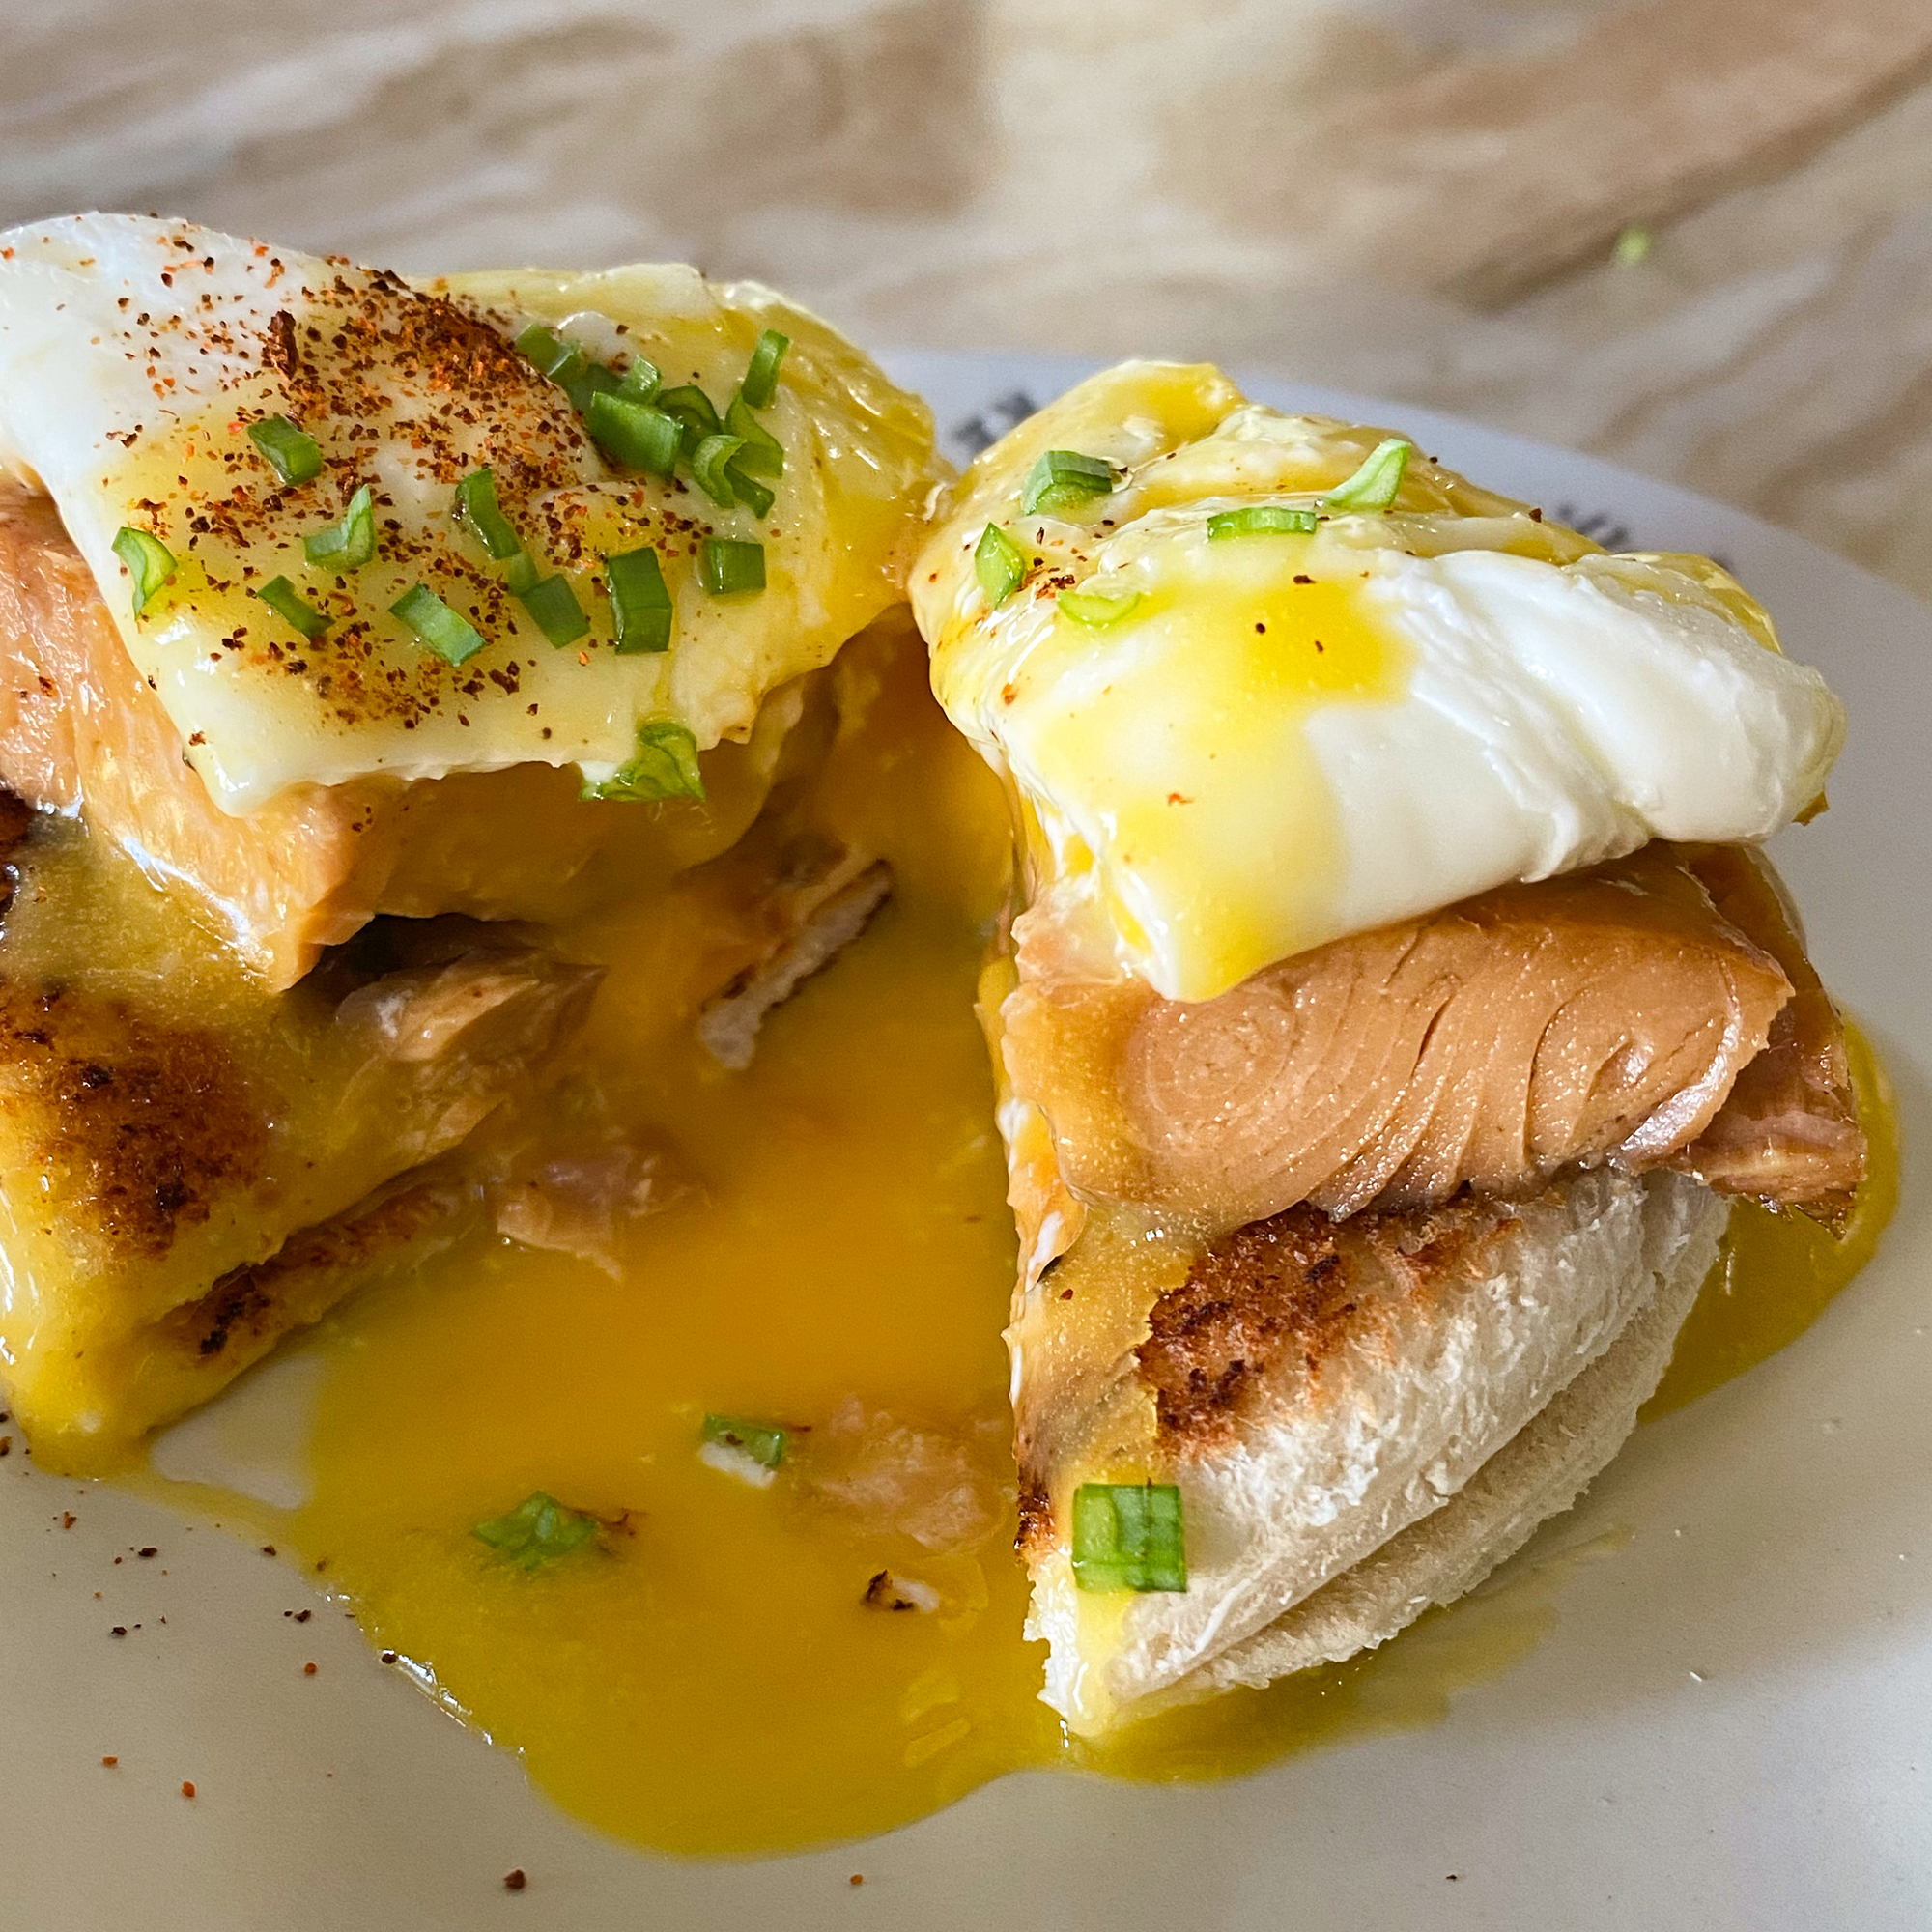 close up view of an Eggs Benedict with a Salmon fillet, garnished with green onions on a white plate